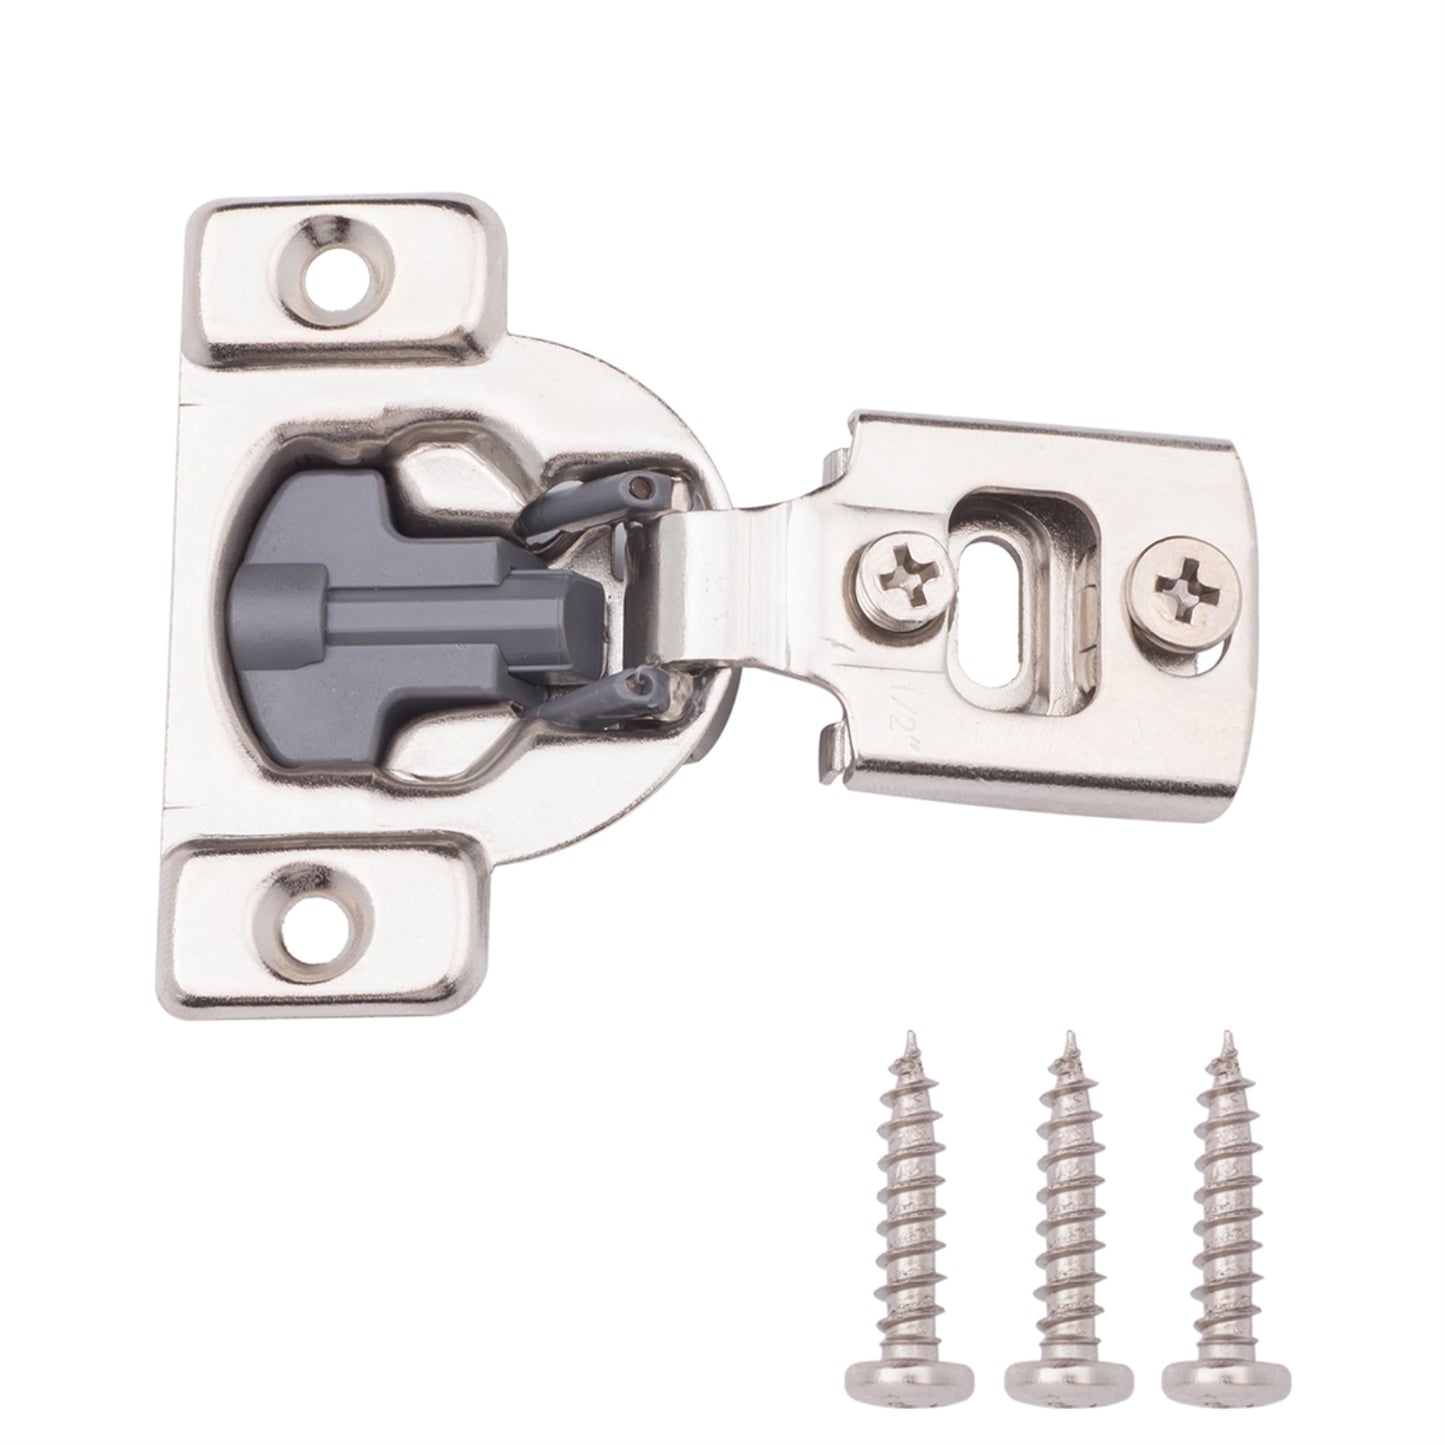 South Main Hardware 108 Degree Compact 1/2-inch Overlay Soft-Close Cabinet Hinge, 35mm Face Frame, Nickel Plated Finish, 5-Pairs